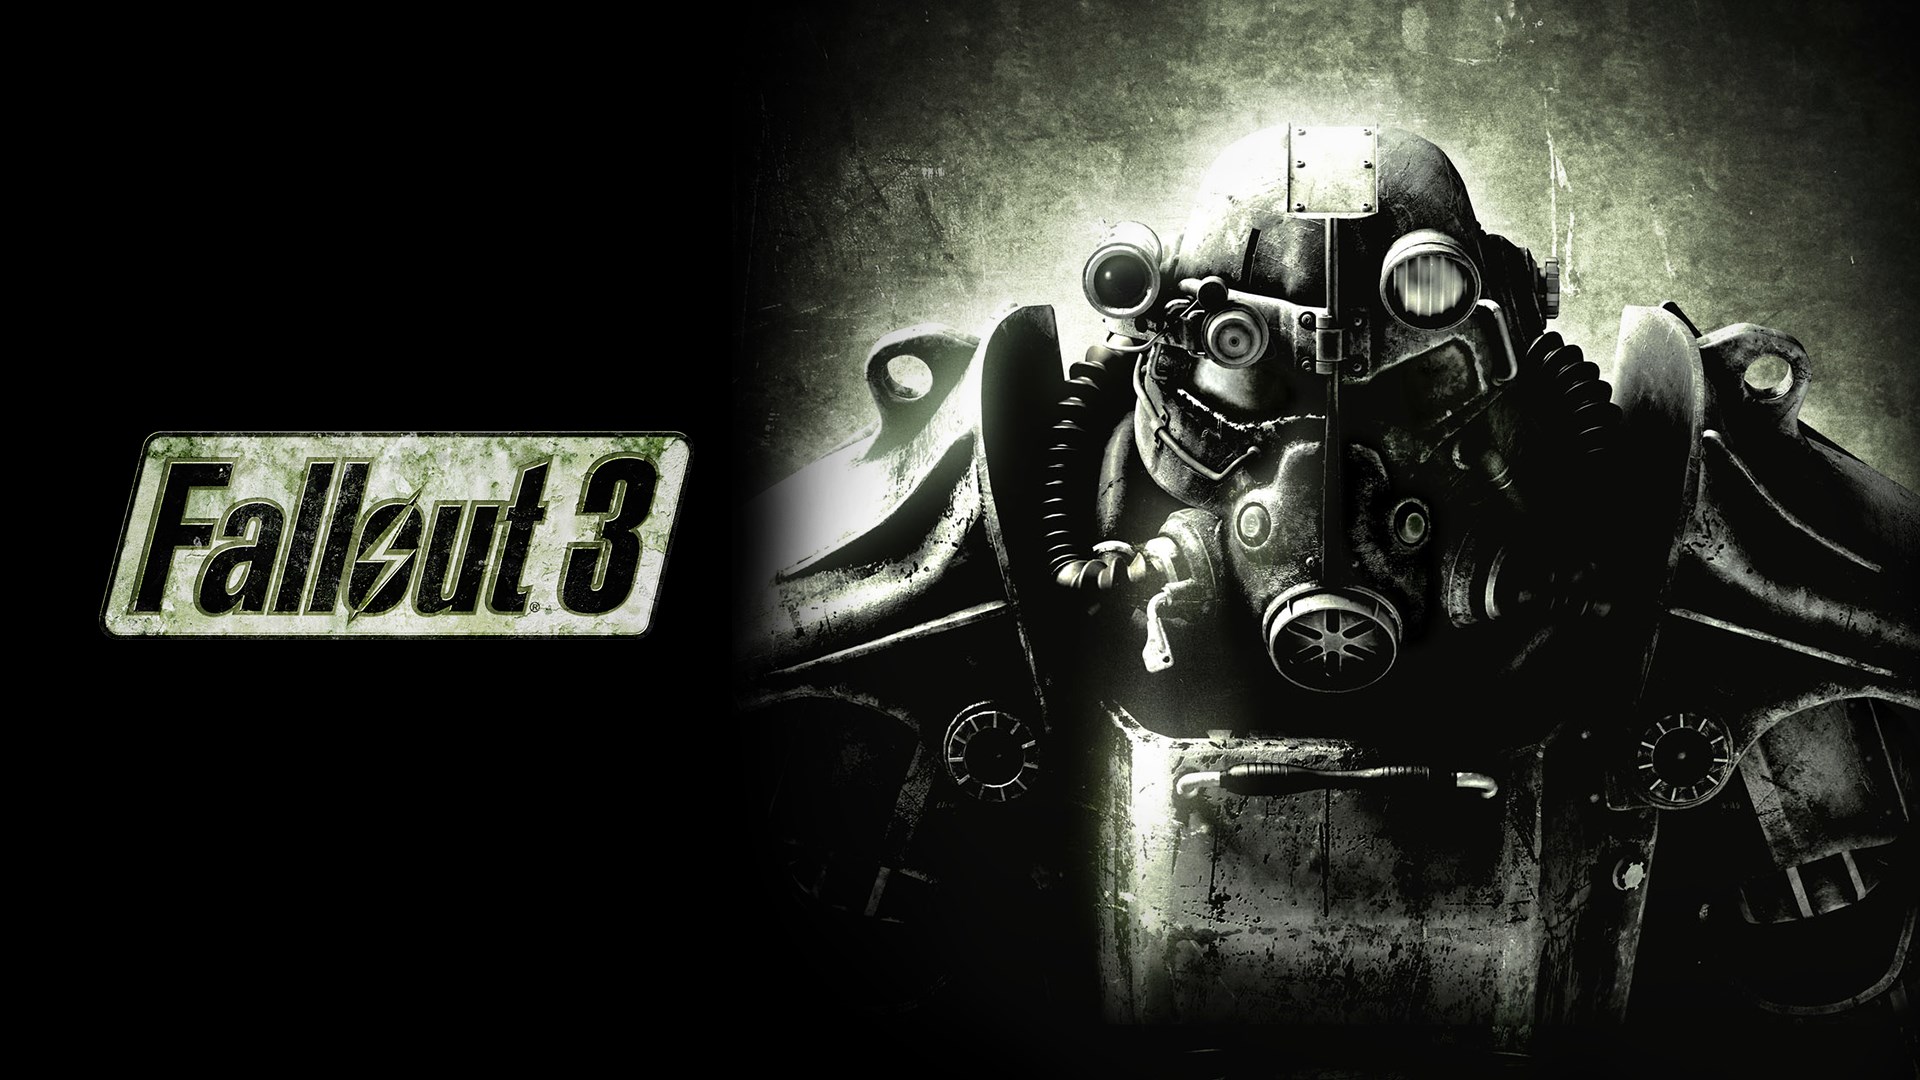 Buy Fallout 3: Game of the Year Edition - Microsoft Store en-AL